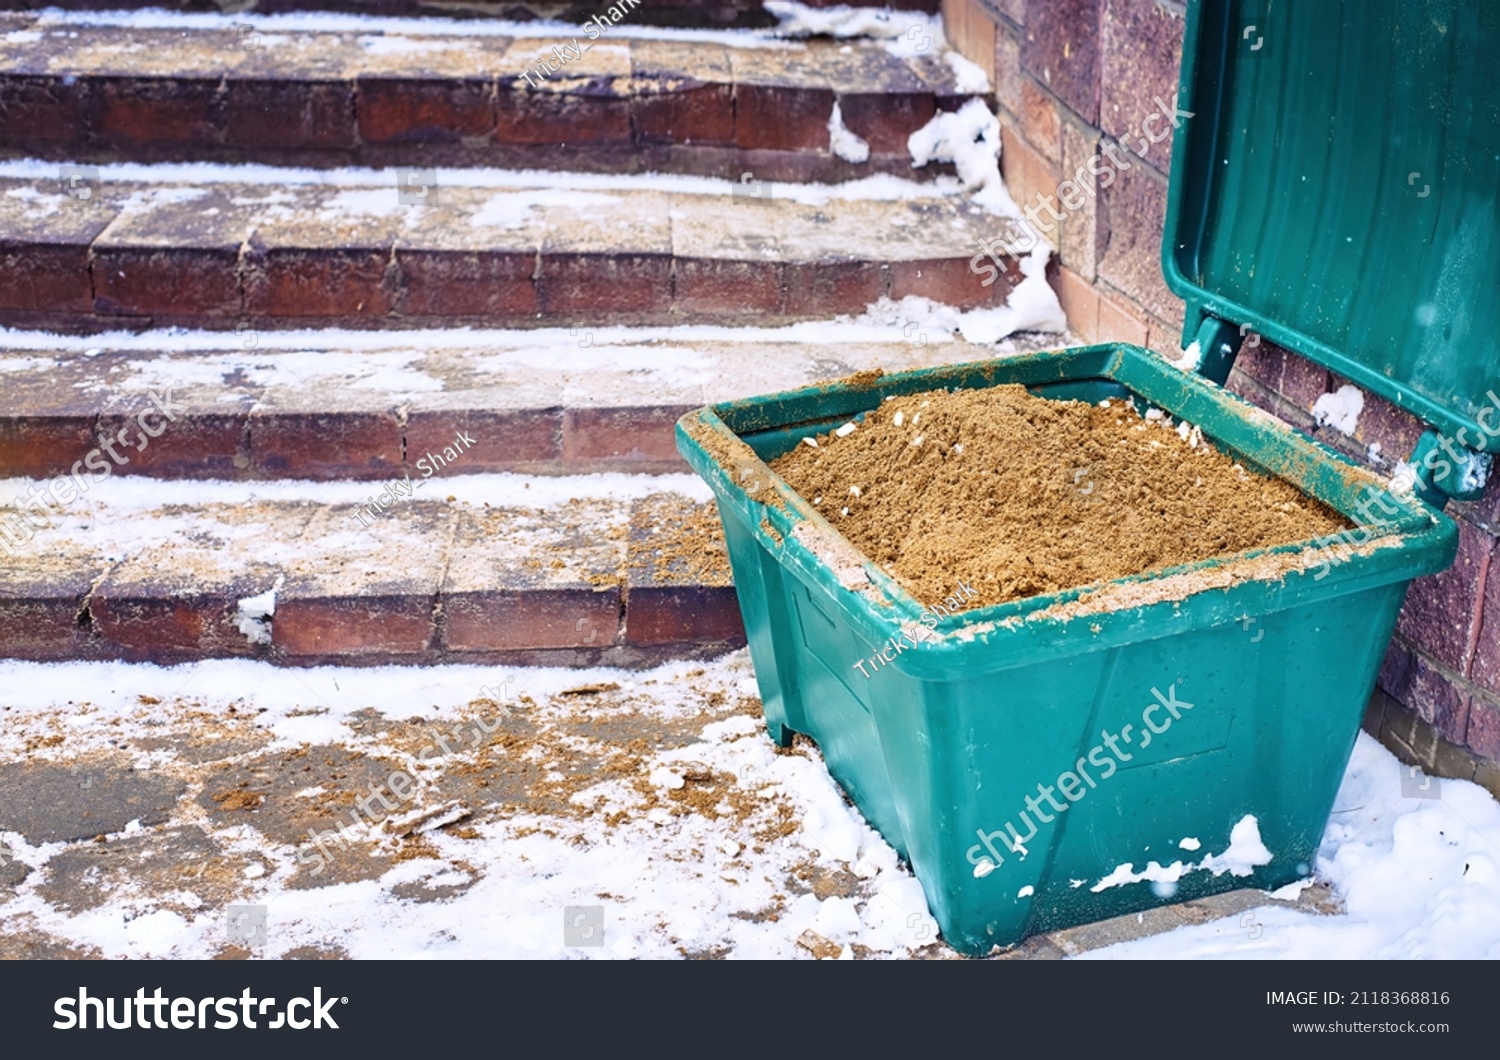 Grit bin, sand for improve traction on snowy and icy steps during winter season. Green plastic grit container, road maintenance in winter. Container with gritting material, prevention slippery surface #2118368816